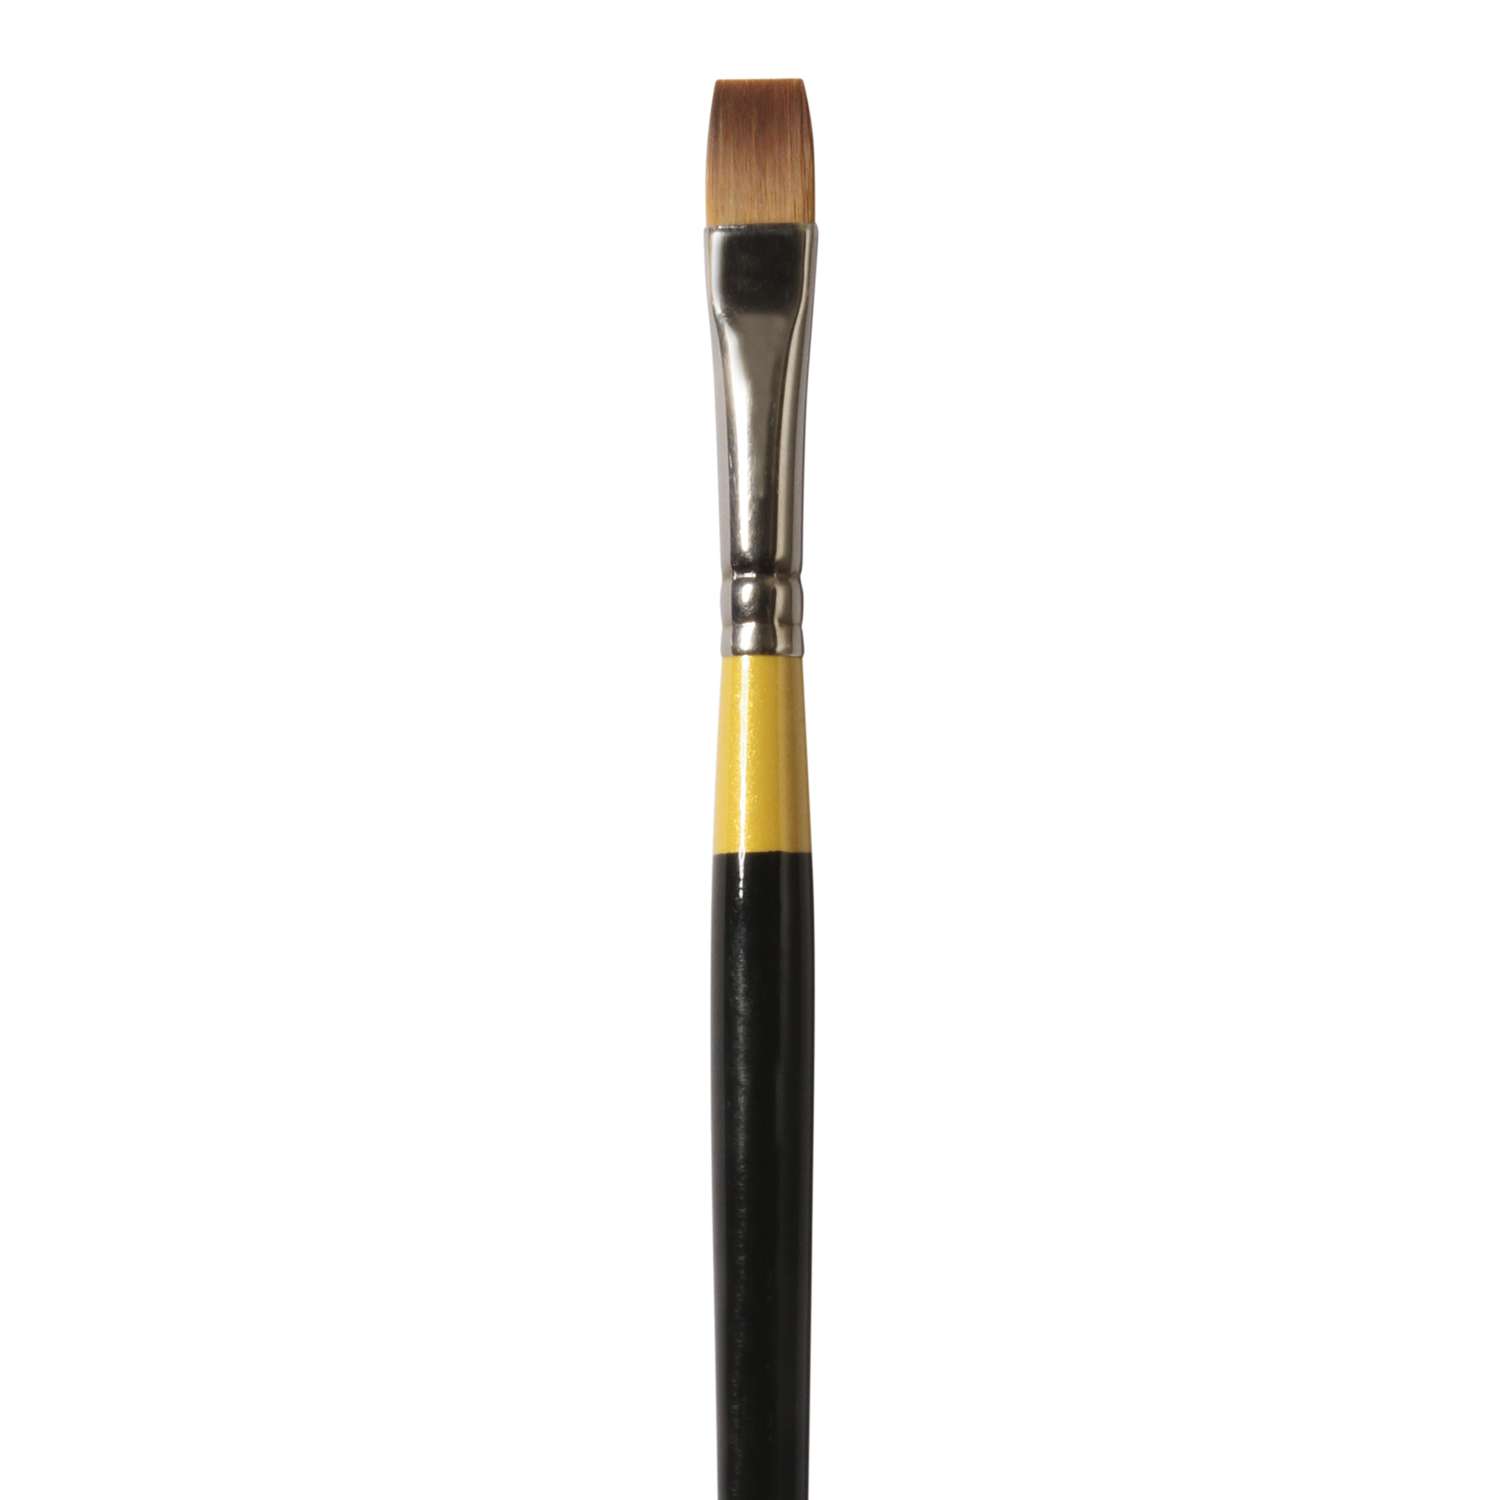  Daler-Rowney System 3 Brush - Angle Shader 1/4 inch (6mm)